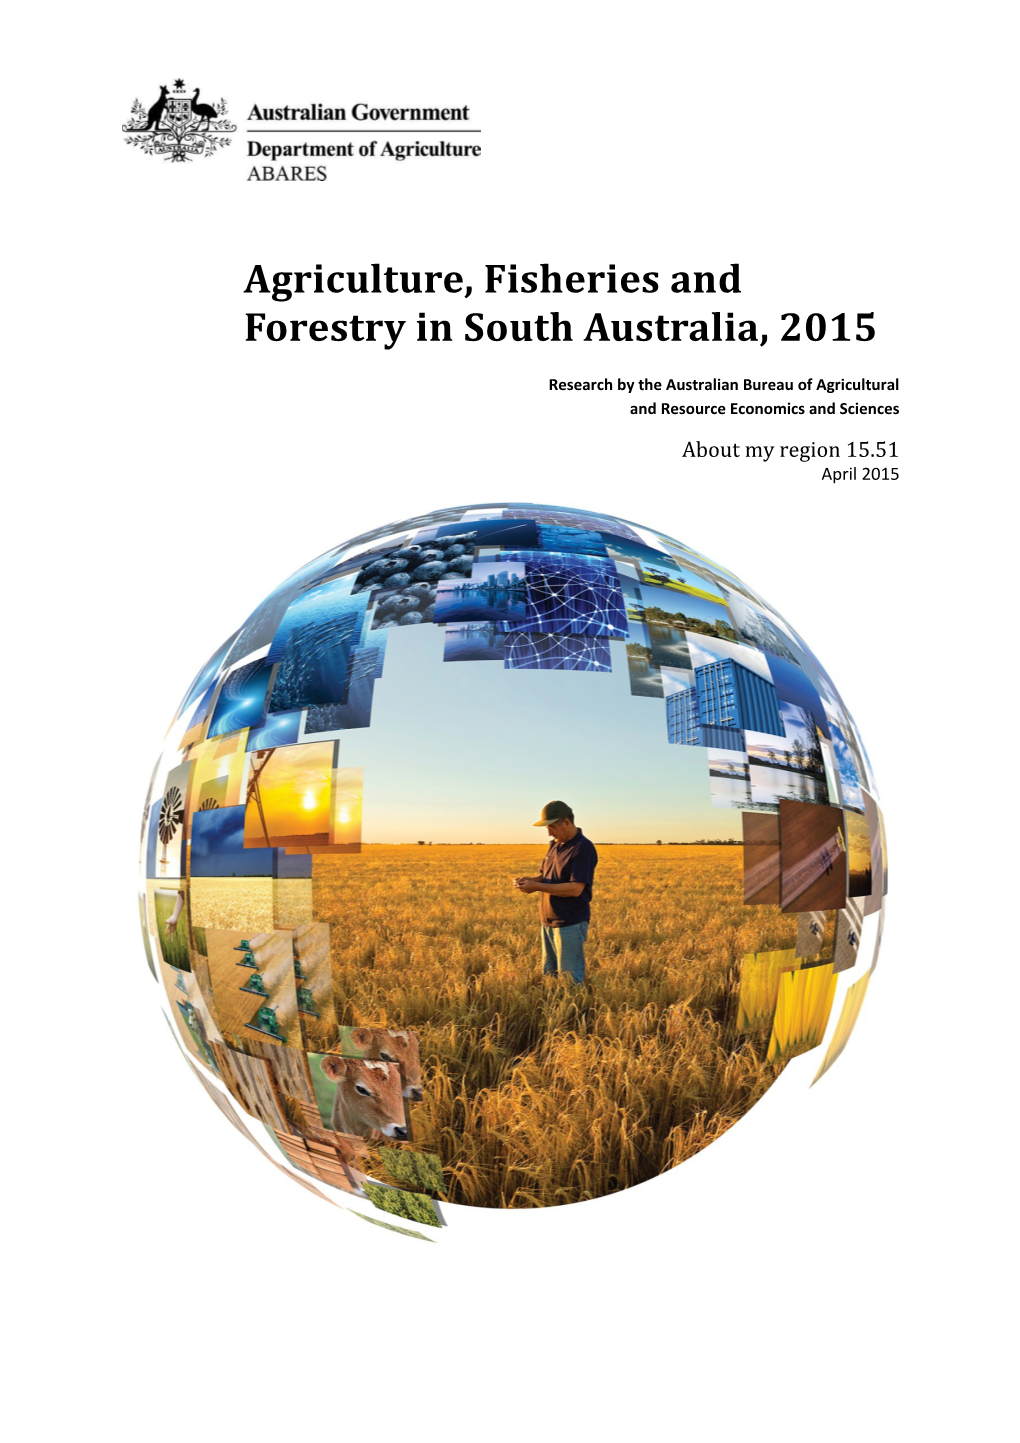 Agriculture, Fisheries and Forestry in South Australia, 2015 ABARES